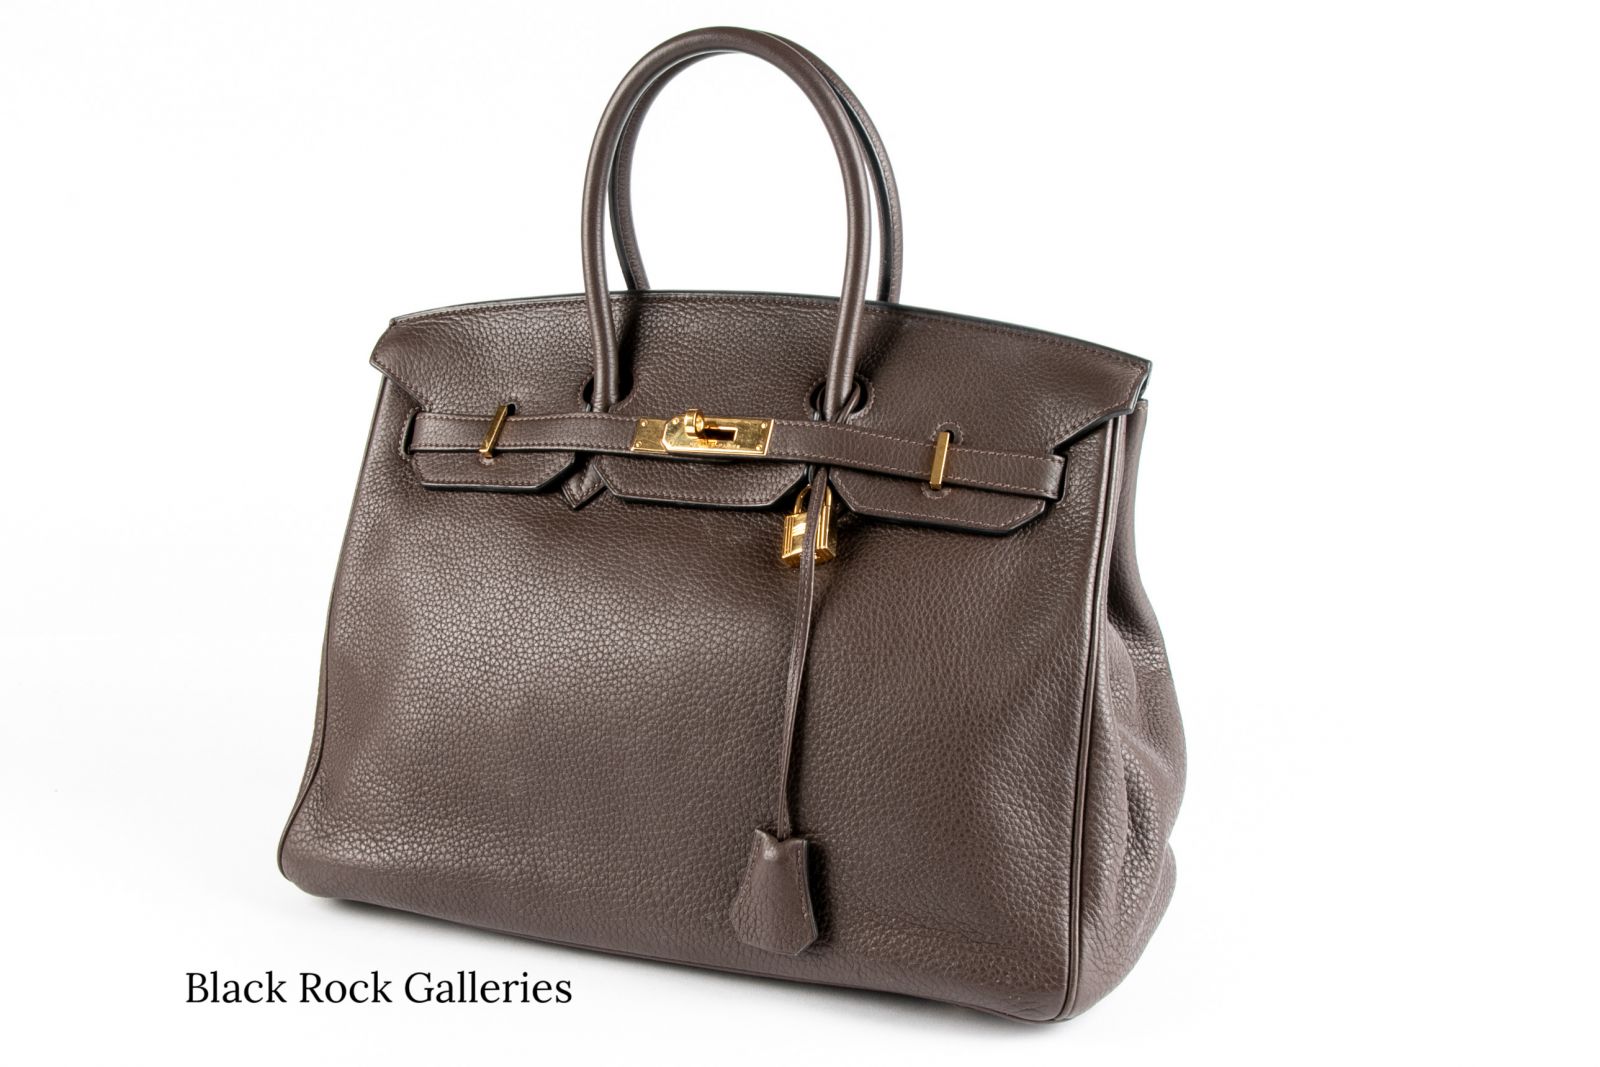 Chocolate Brown Hermes Birkin Bag with Gold-tone accents